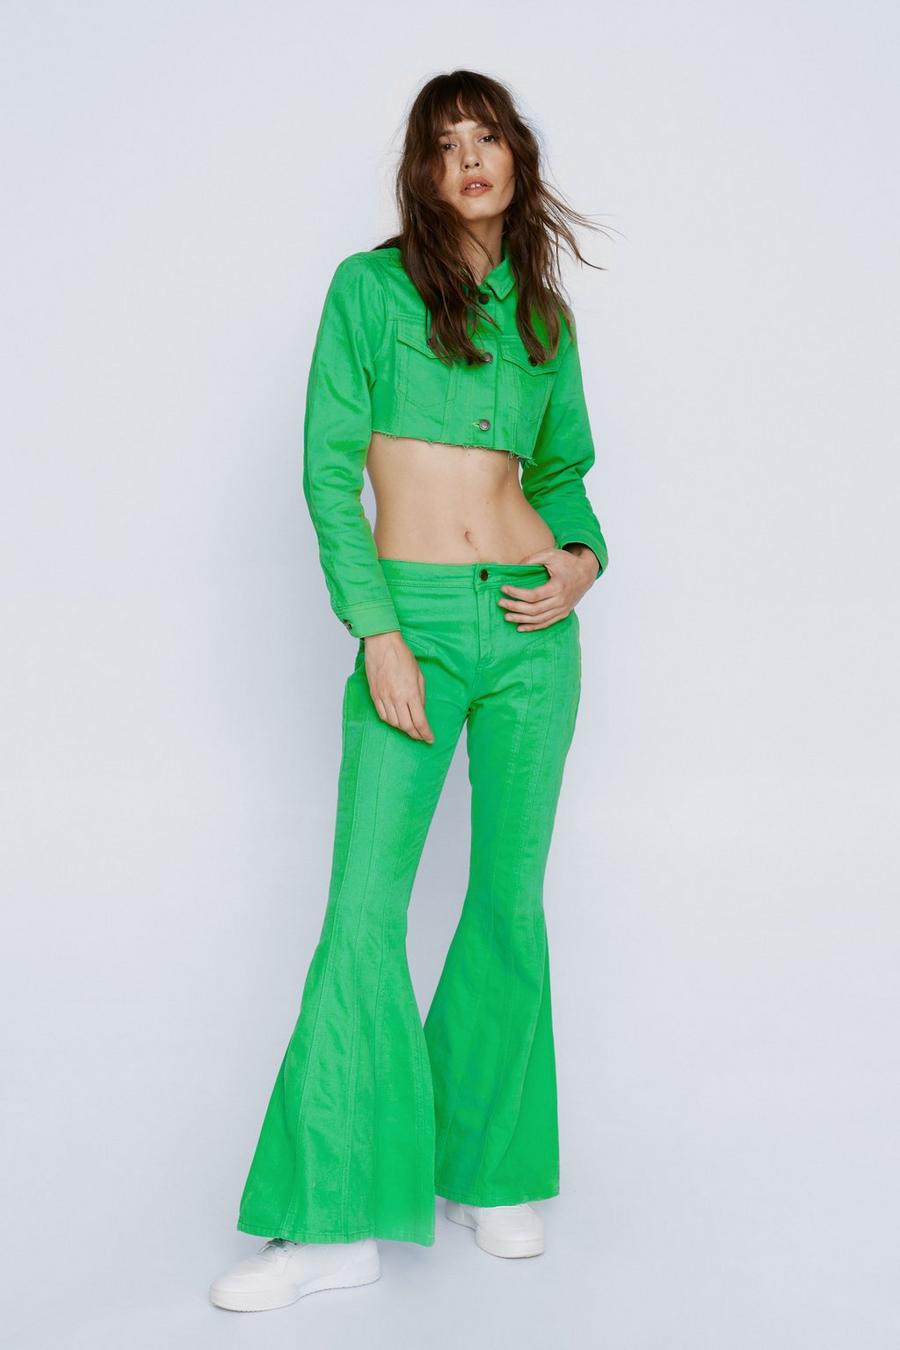 TOPSHOP Floral Mesh Seam Skinny Flare Trouser With Front Hem Splits in  Green